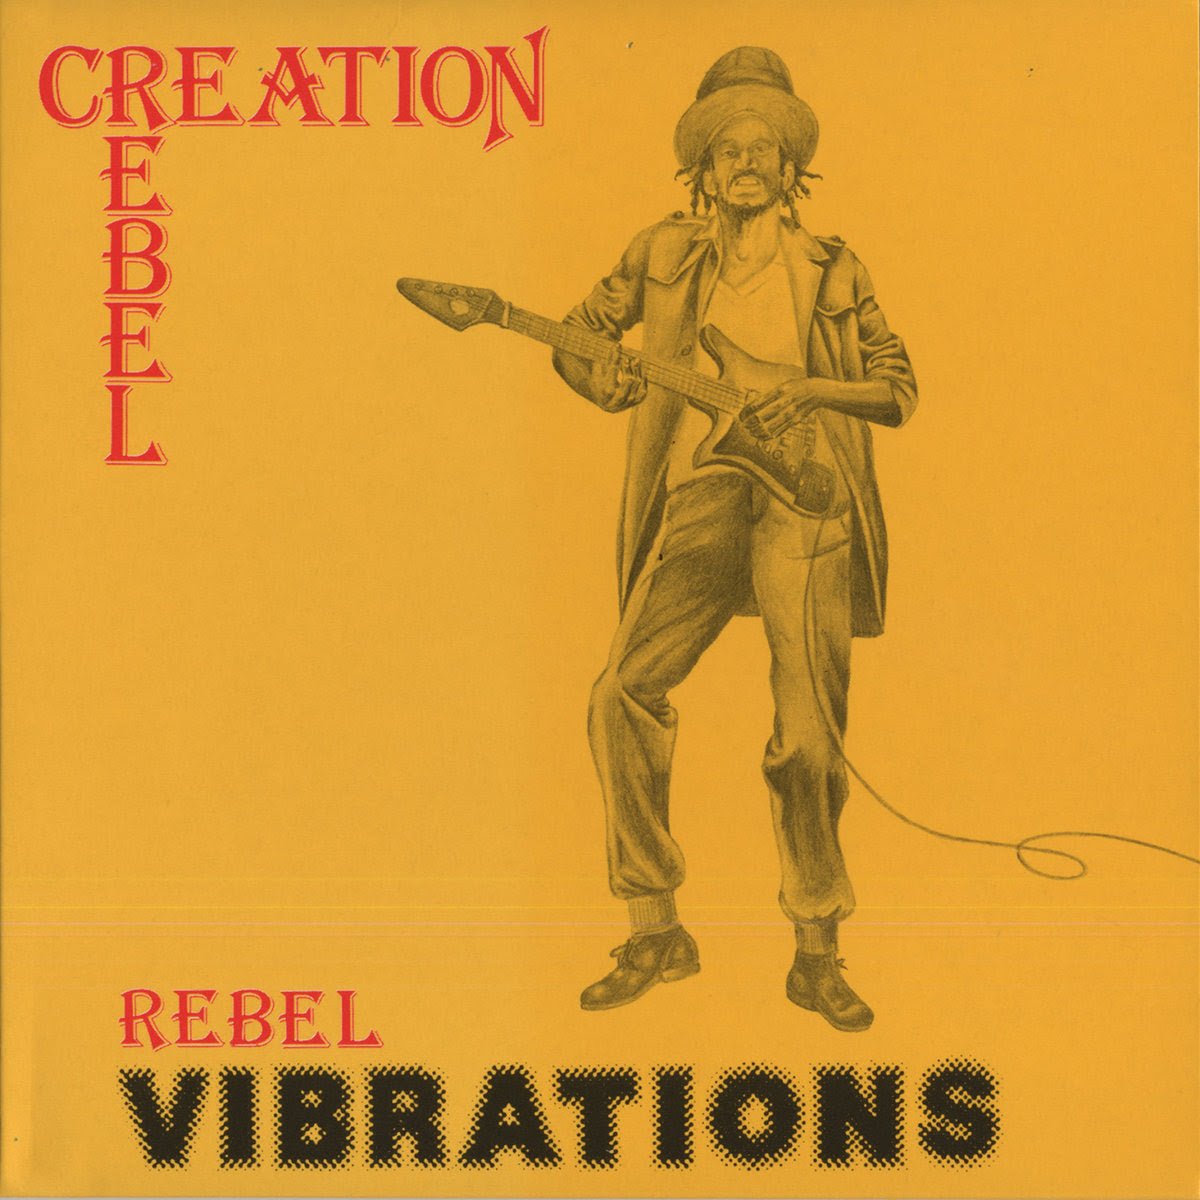 Creation Rebel - Rebel Vibrations | Buy the Vinyl LP from Flying Nun Records